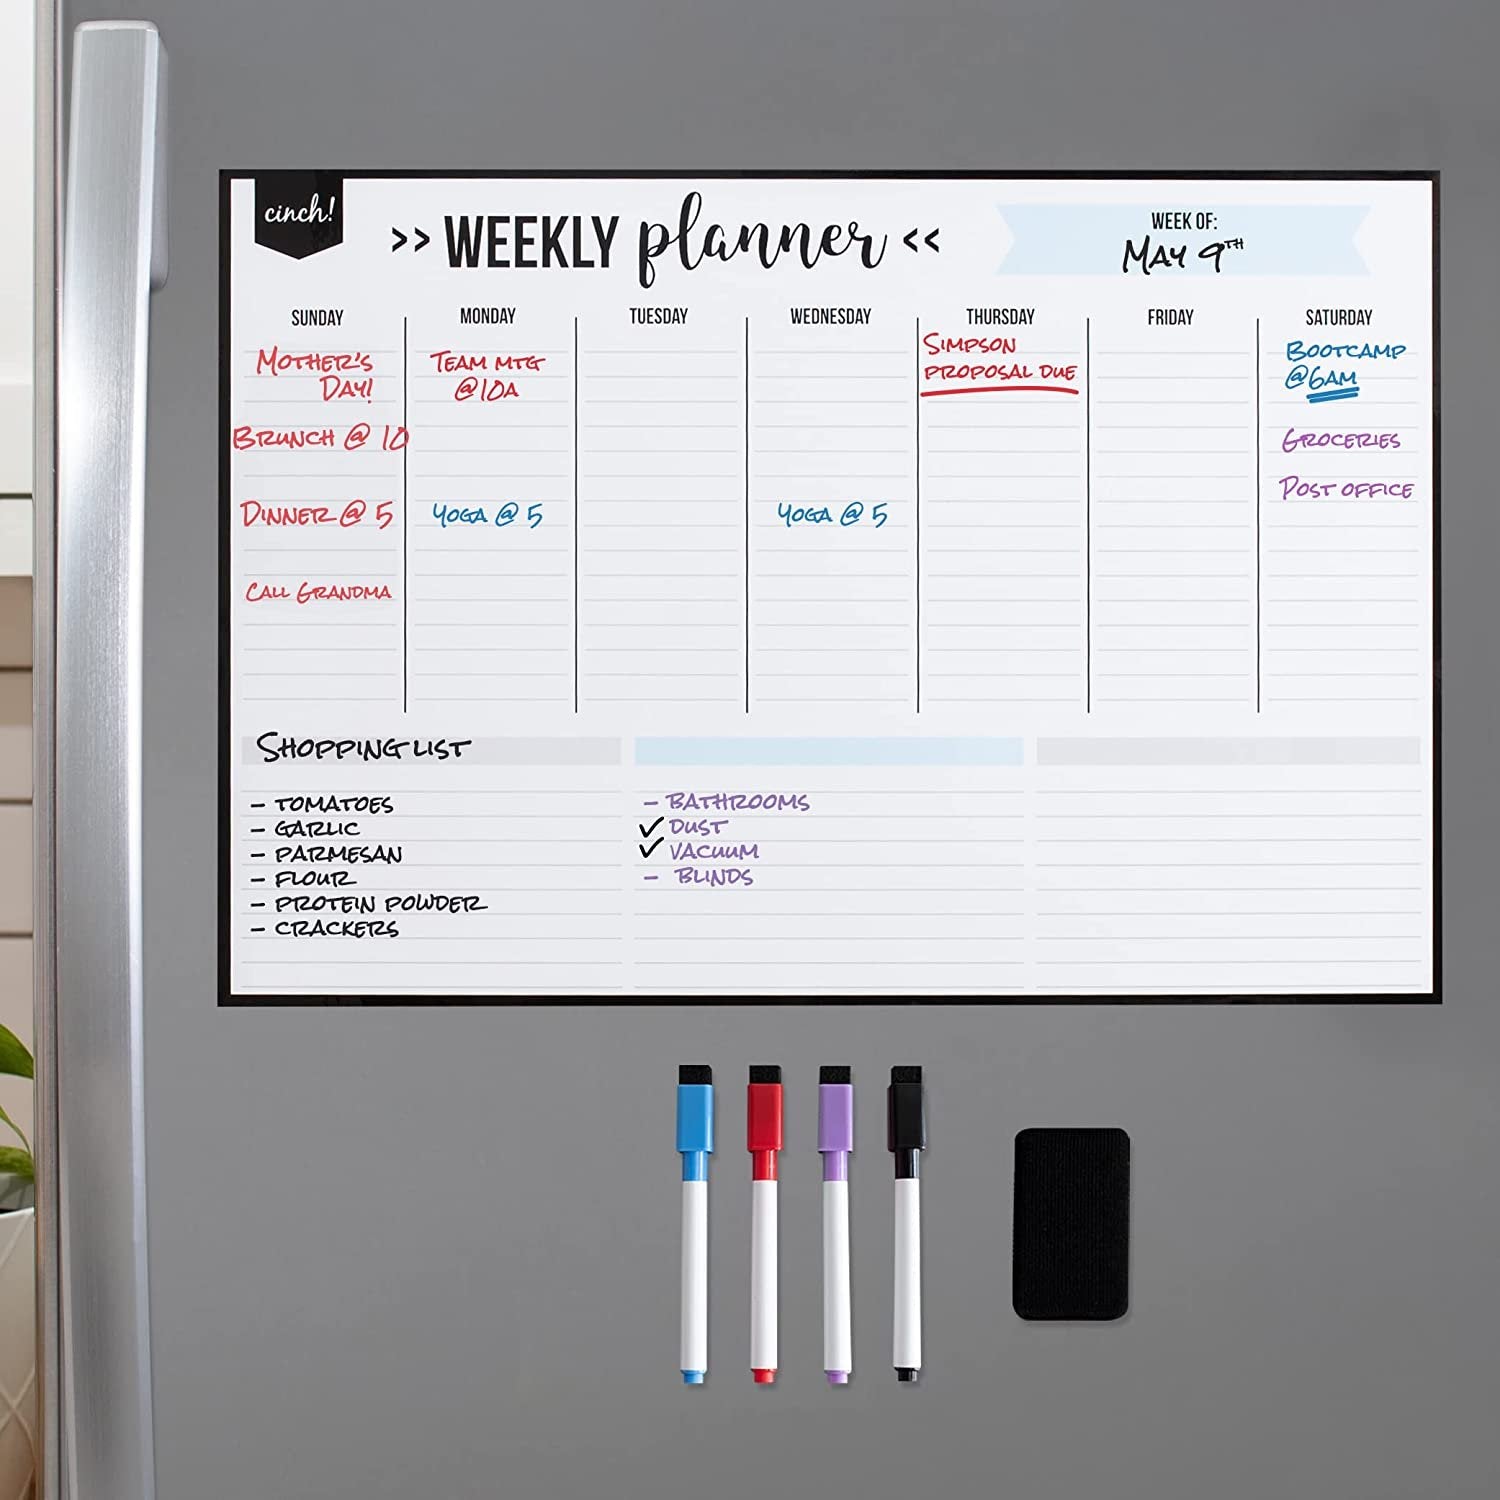 Magnetic Dry Erase Weekly Planner Calendar for Fridge: Stain Resistant Technology - 19x13" - 4 Fine Tip Markers and Large Eraser with Magnets - Whiteboard Organizer Planner: Refrigerator White Board